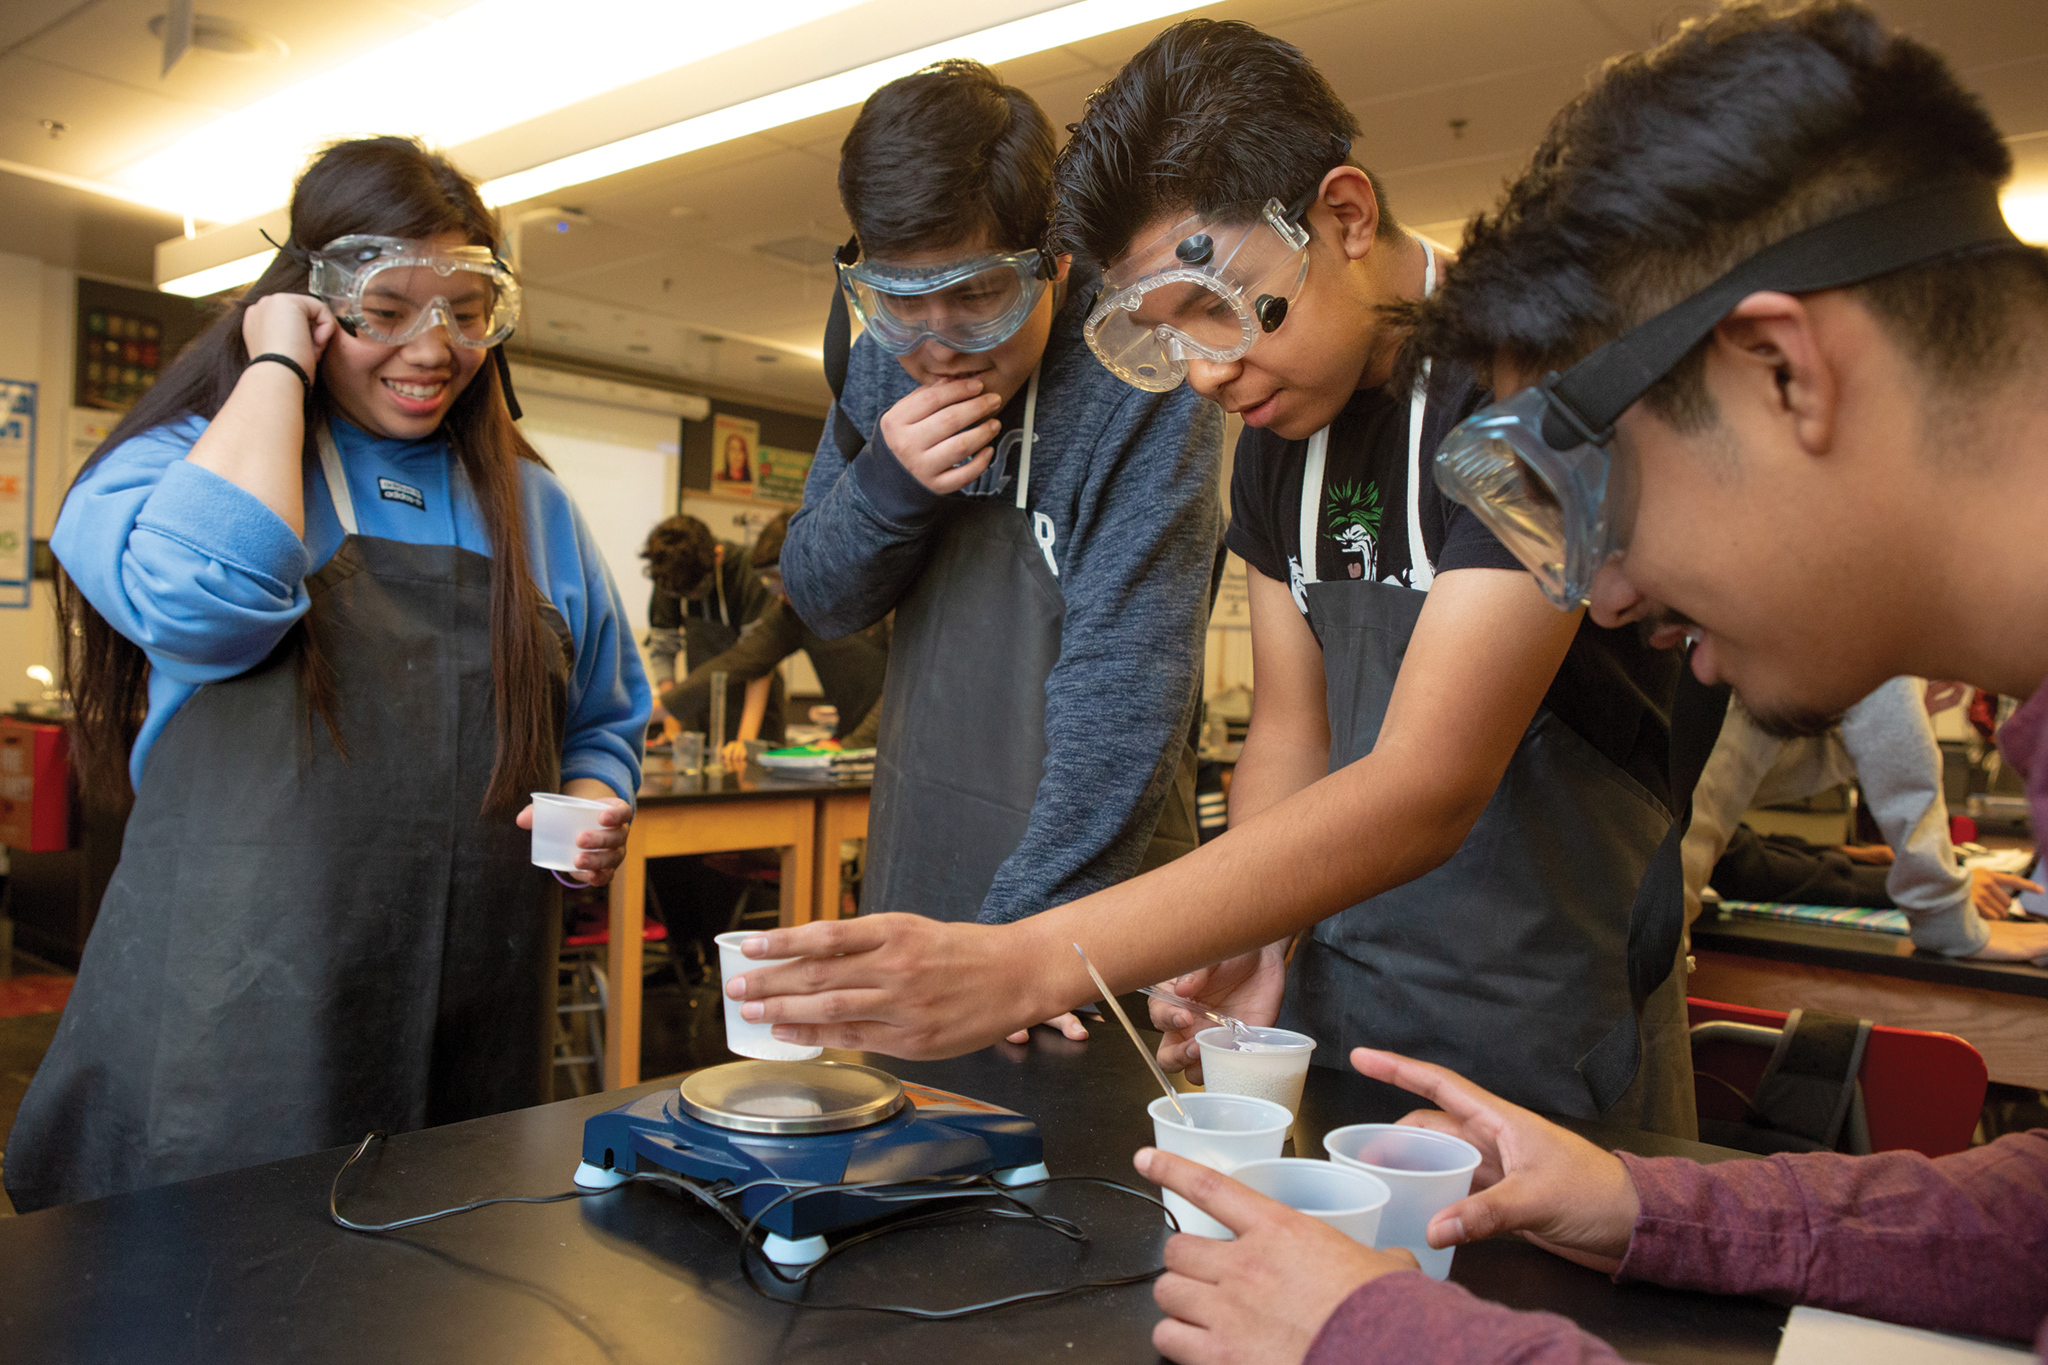 Three high school boys and one high school girl work together on an experiment in chemistry class.